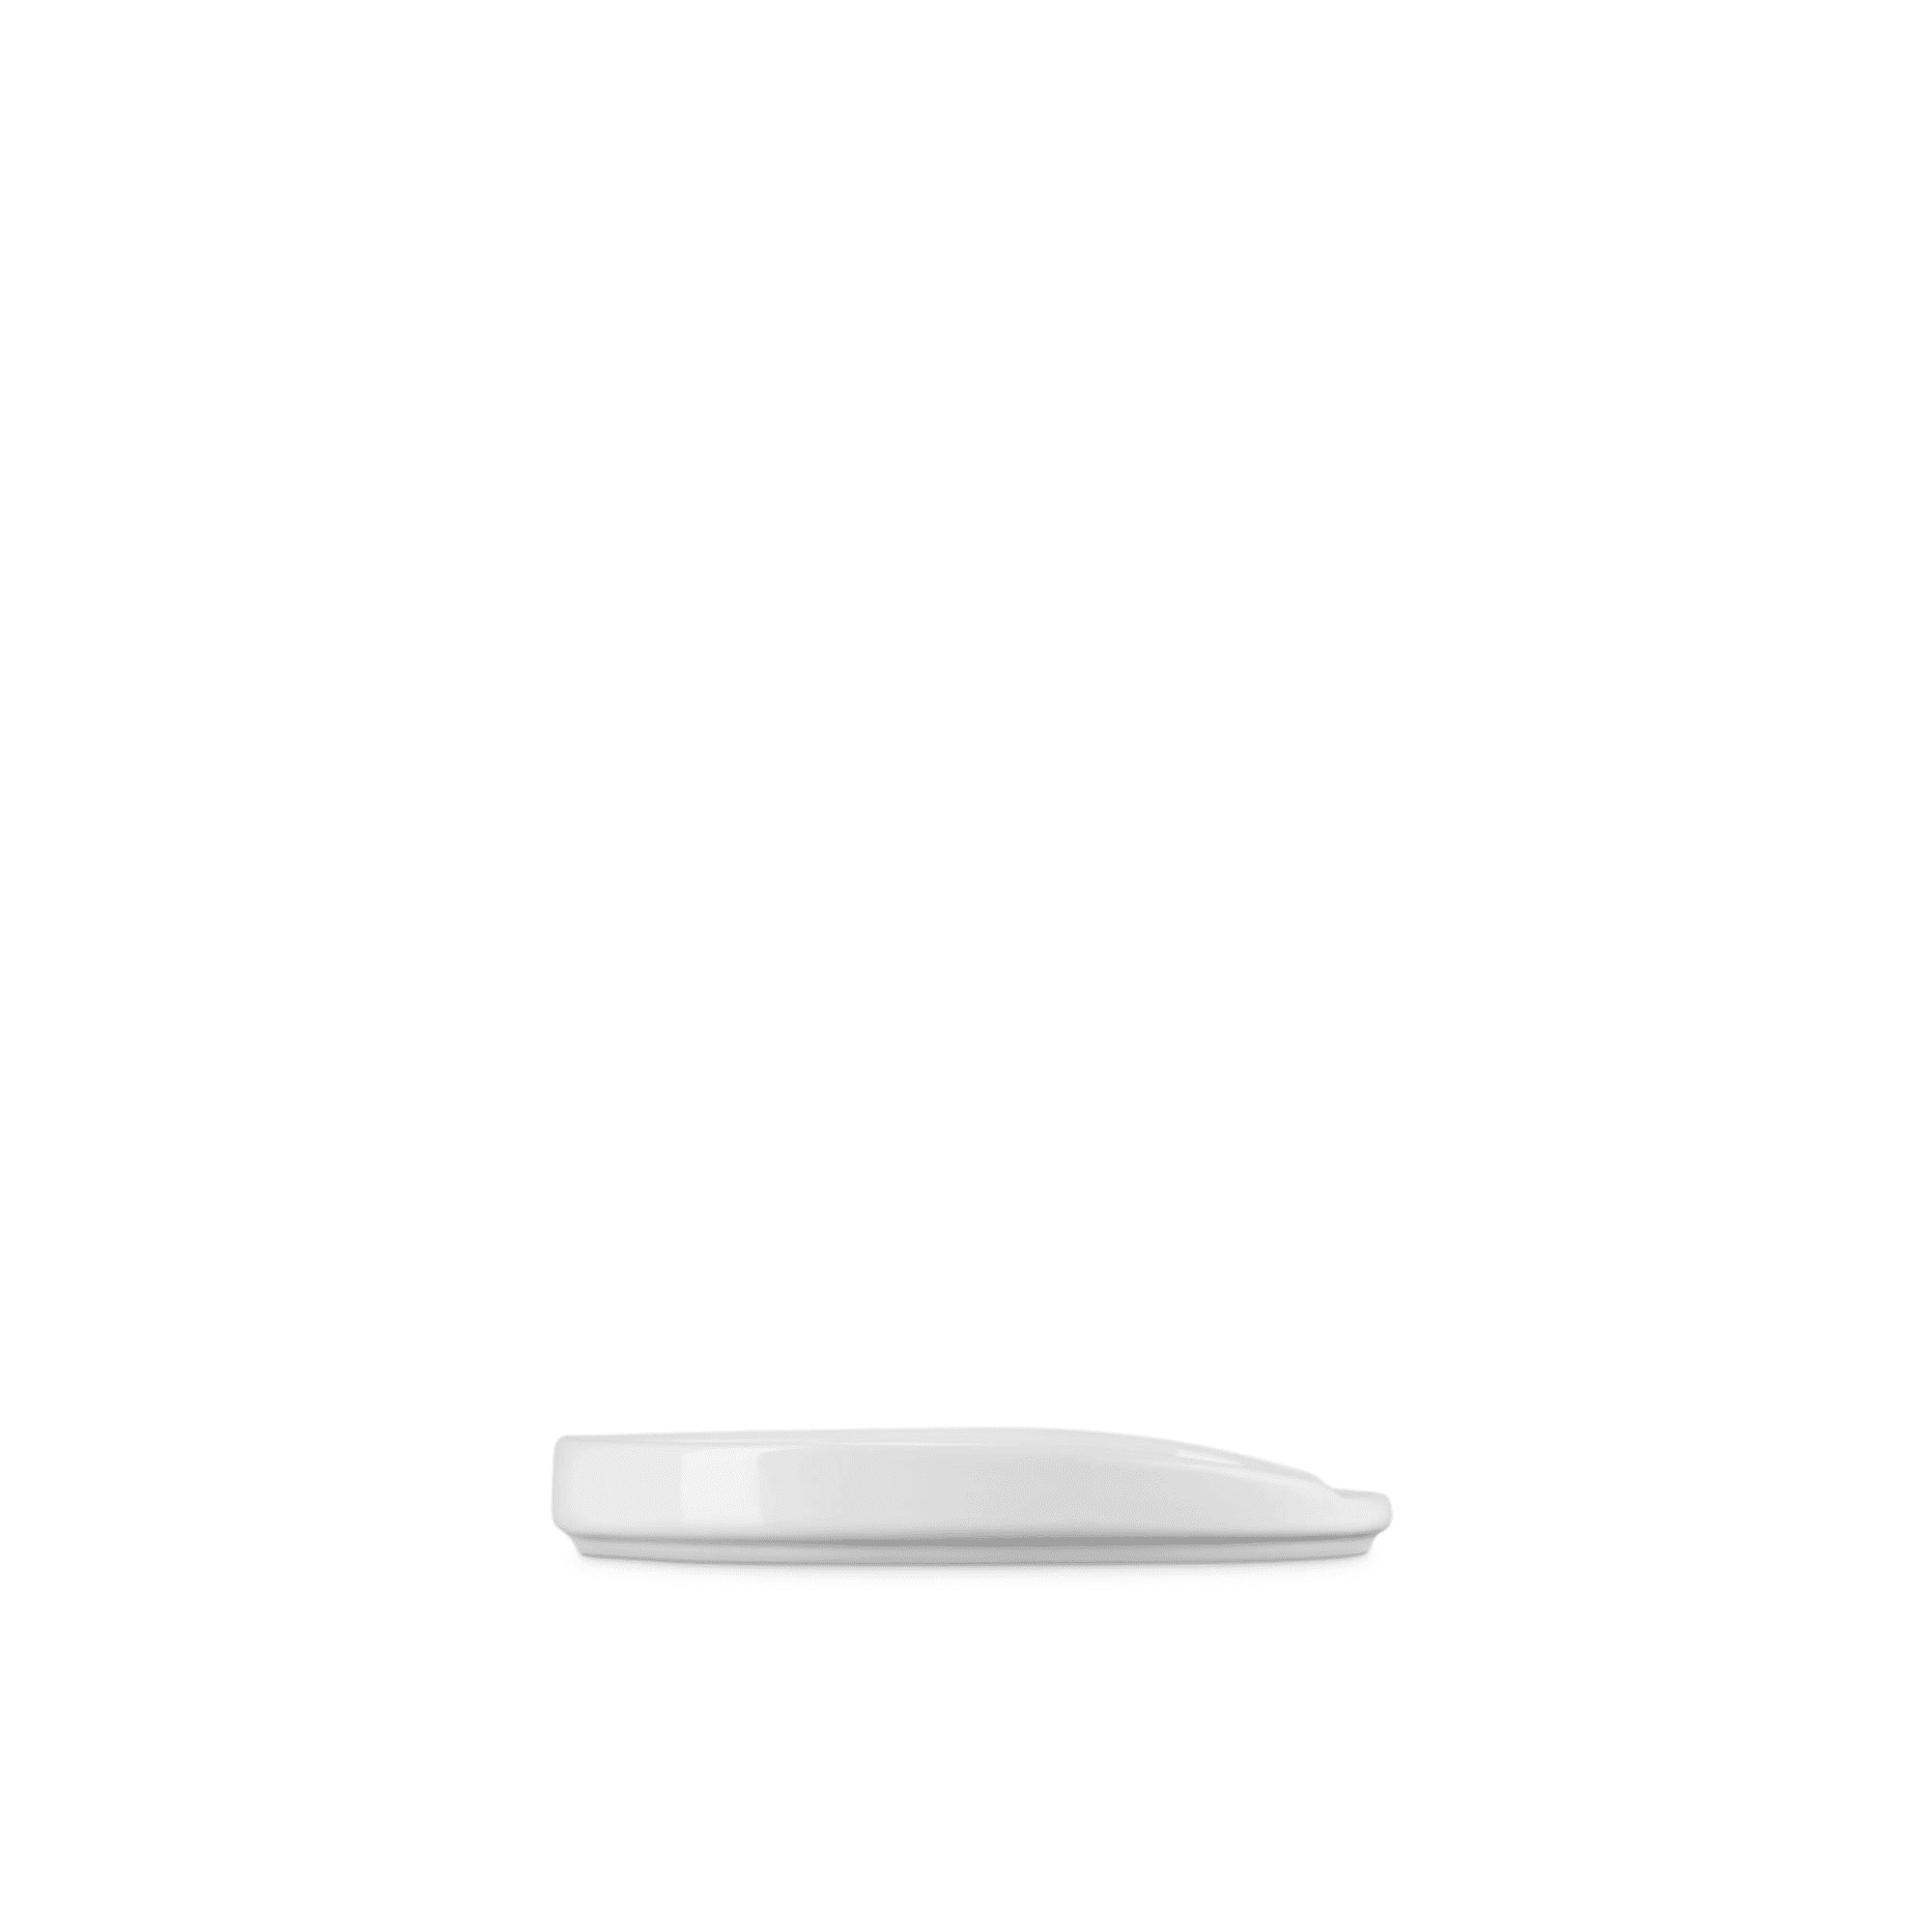 Le Creuset Stoneware Oval Spoon Rest White Image 3